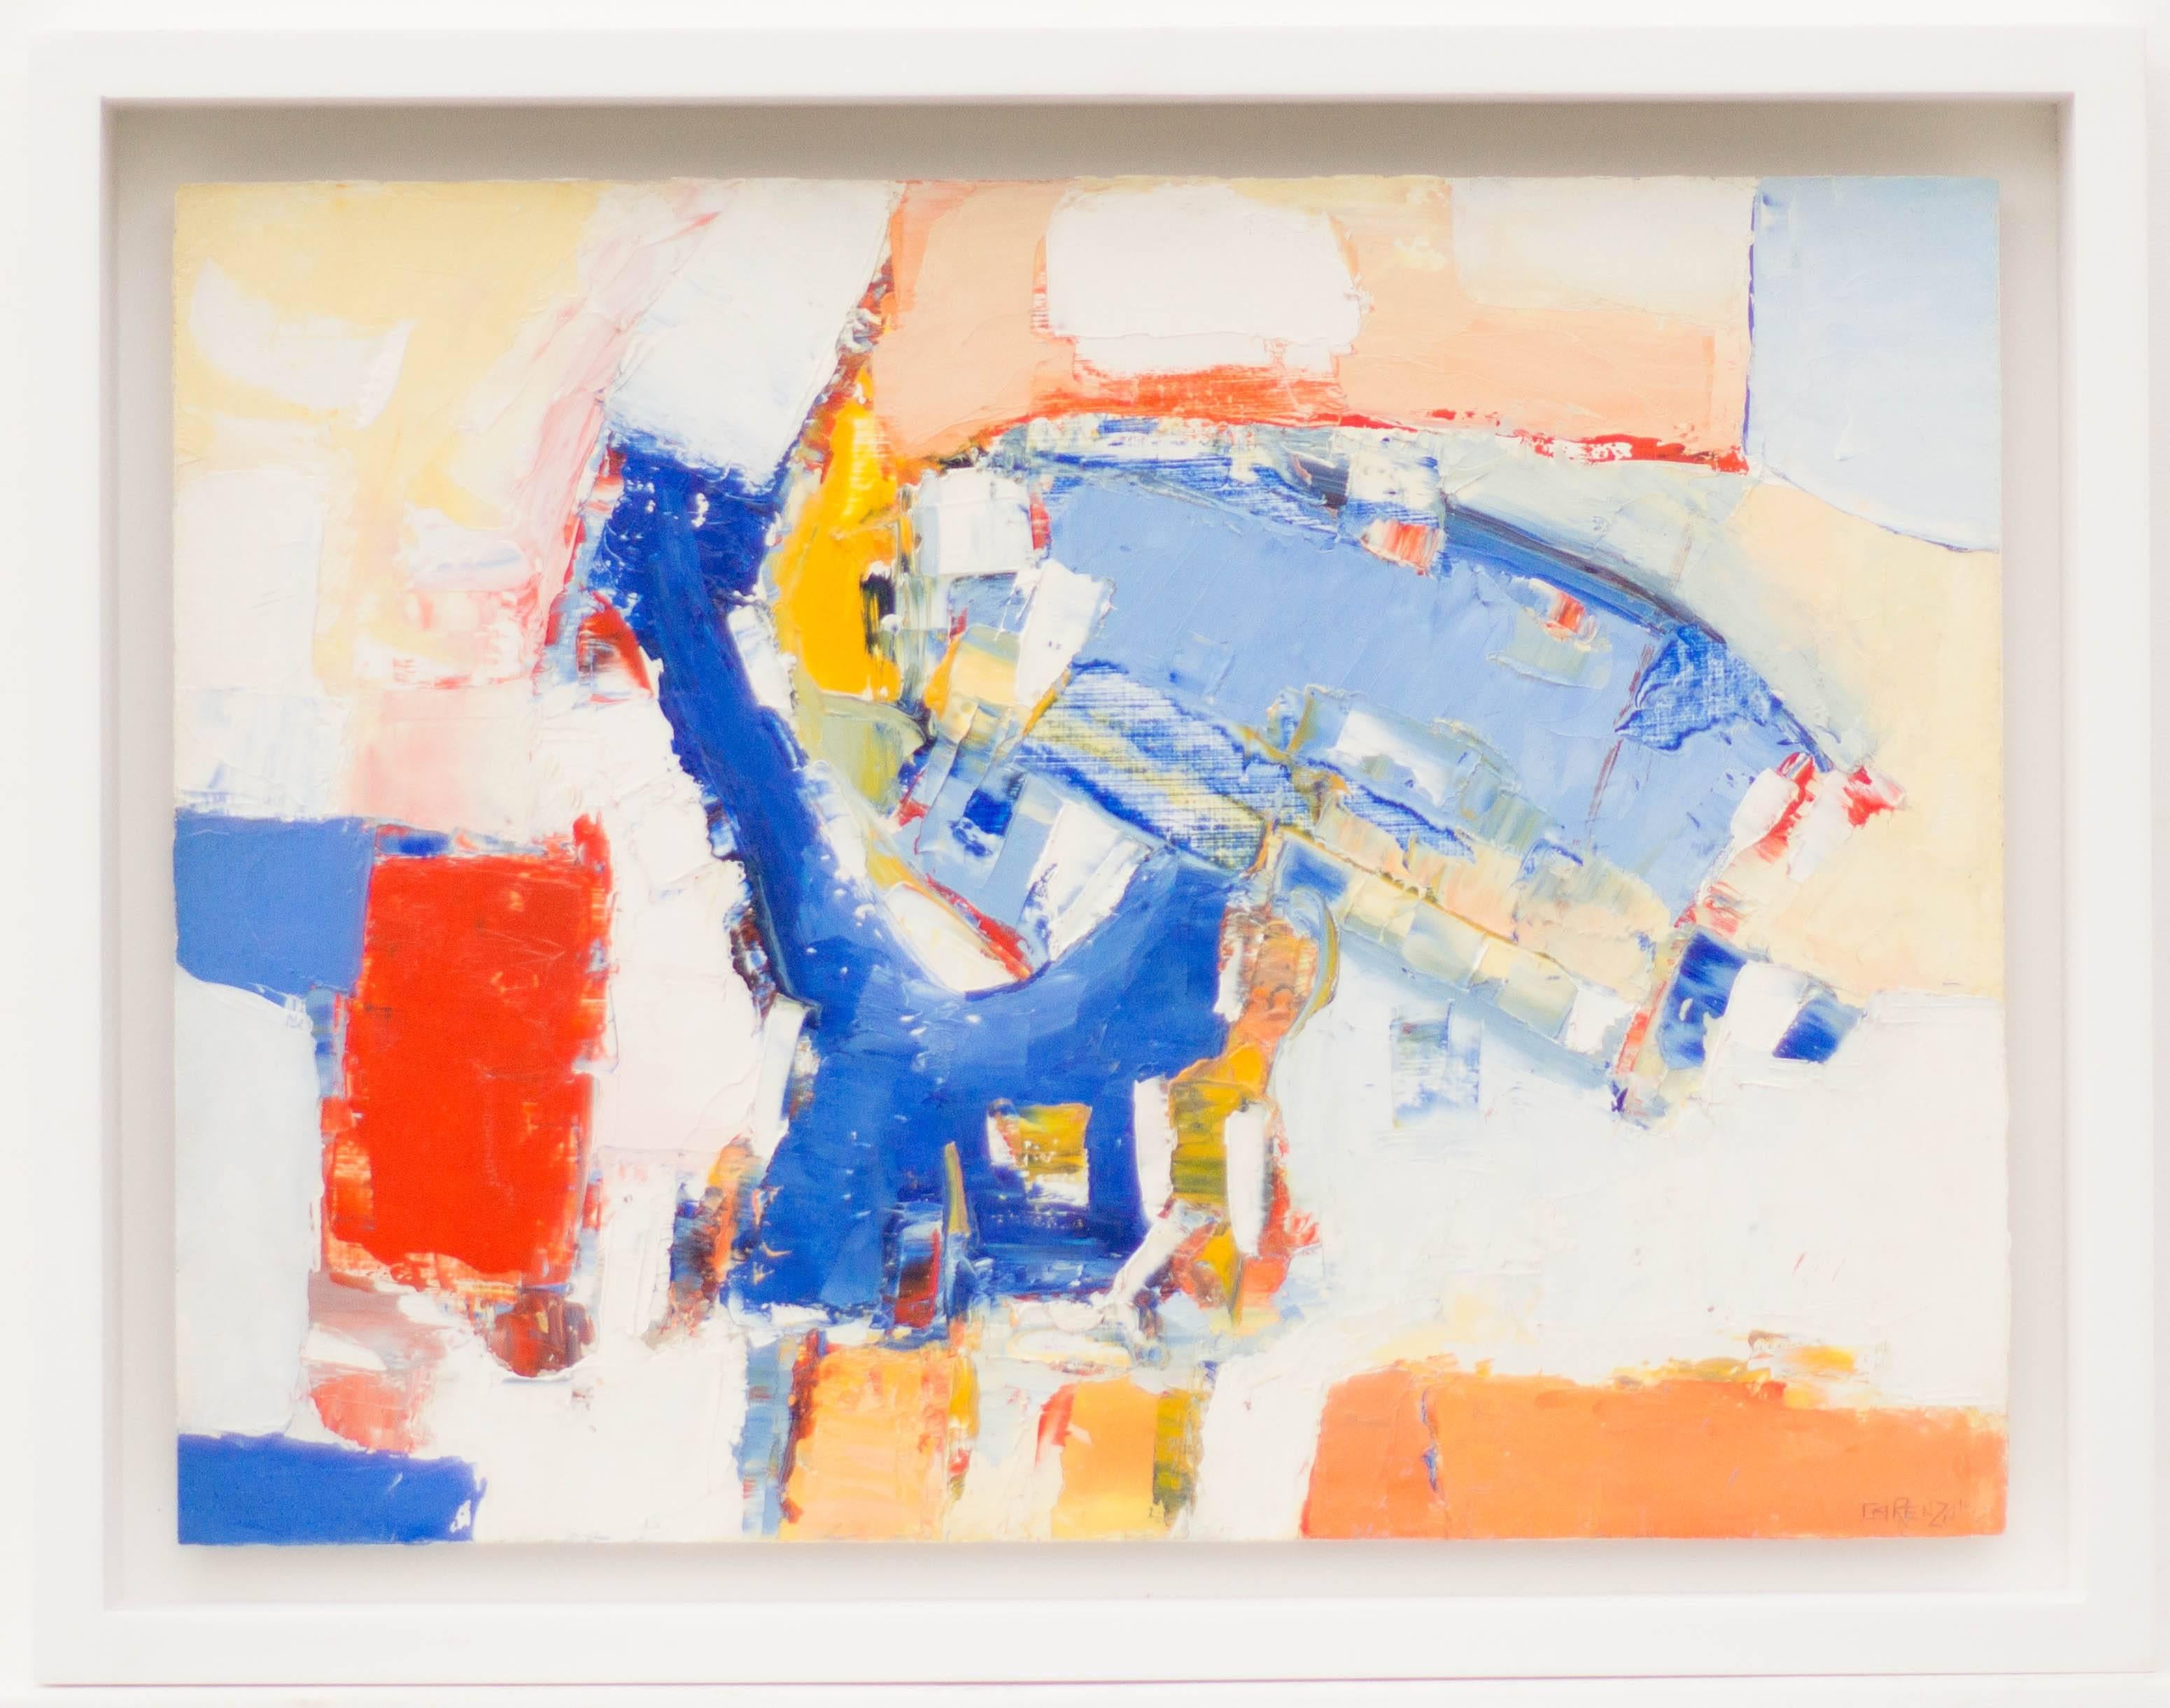 Unknown Abstract Painting - Abstract Composition in Blue, White, Red and Orange